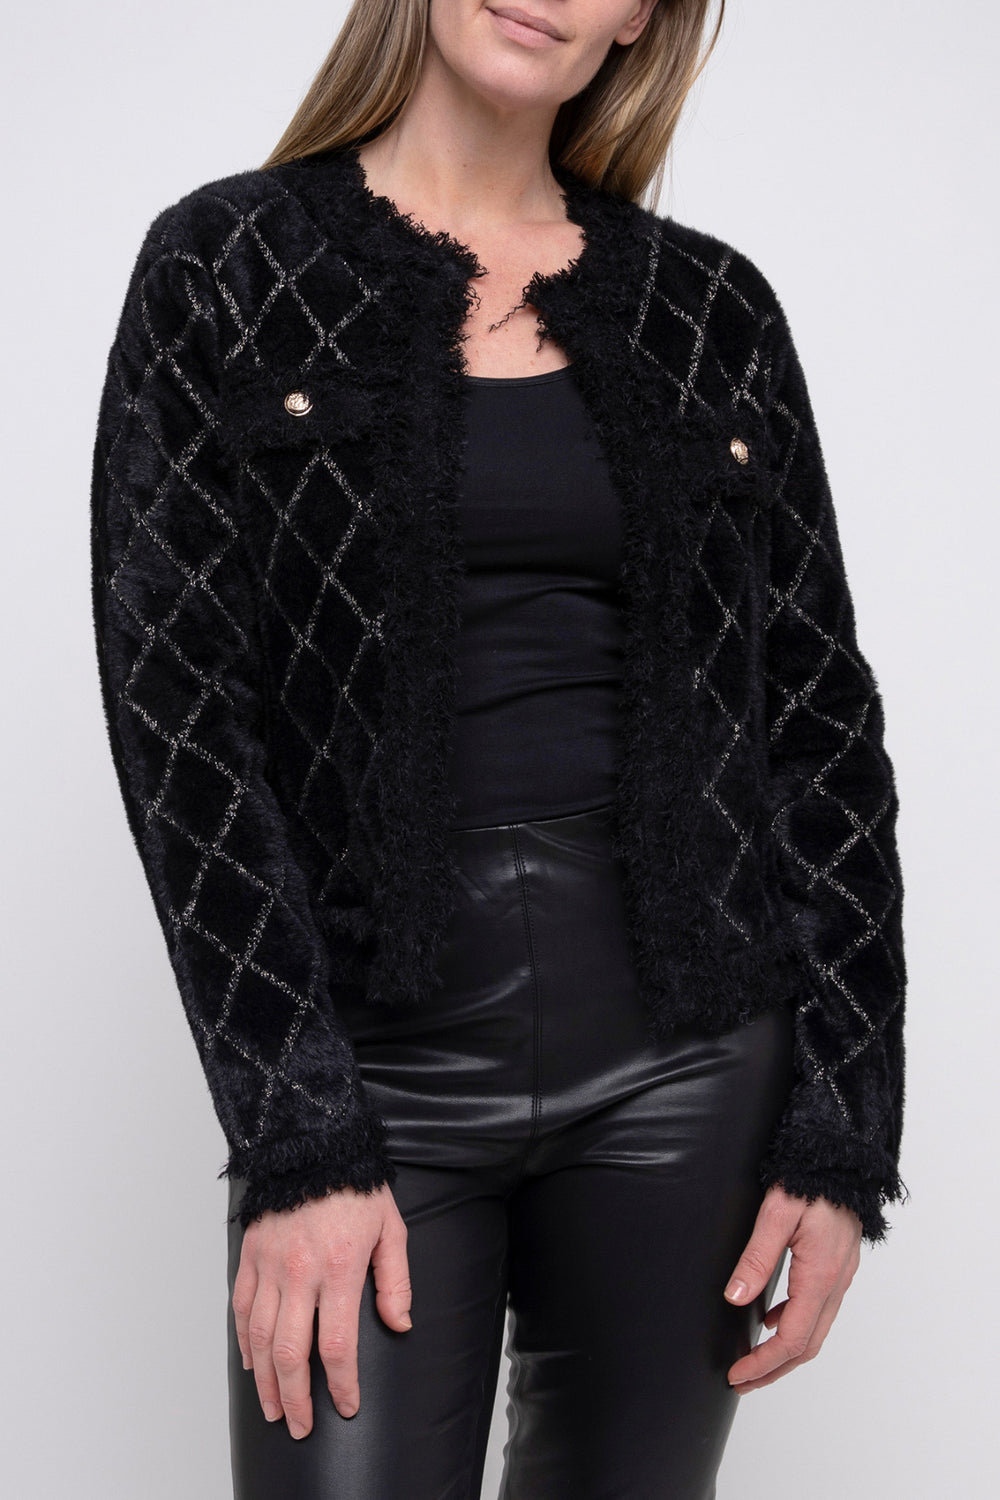 Brand : Ping Pong  Crop Bolero Cardigan Style Code : P545411 Colour : Black/Gold  Fabric : 69% Nylon 18% Polyester 13% Viscose Cold hand wash Crop Length Faux pockets with gold buttons Hook and clasp fastening at collar Beautiful soft knit cardi with delicate fringe trim 